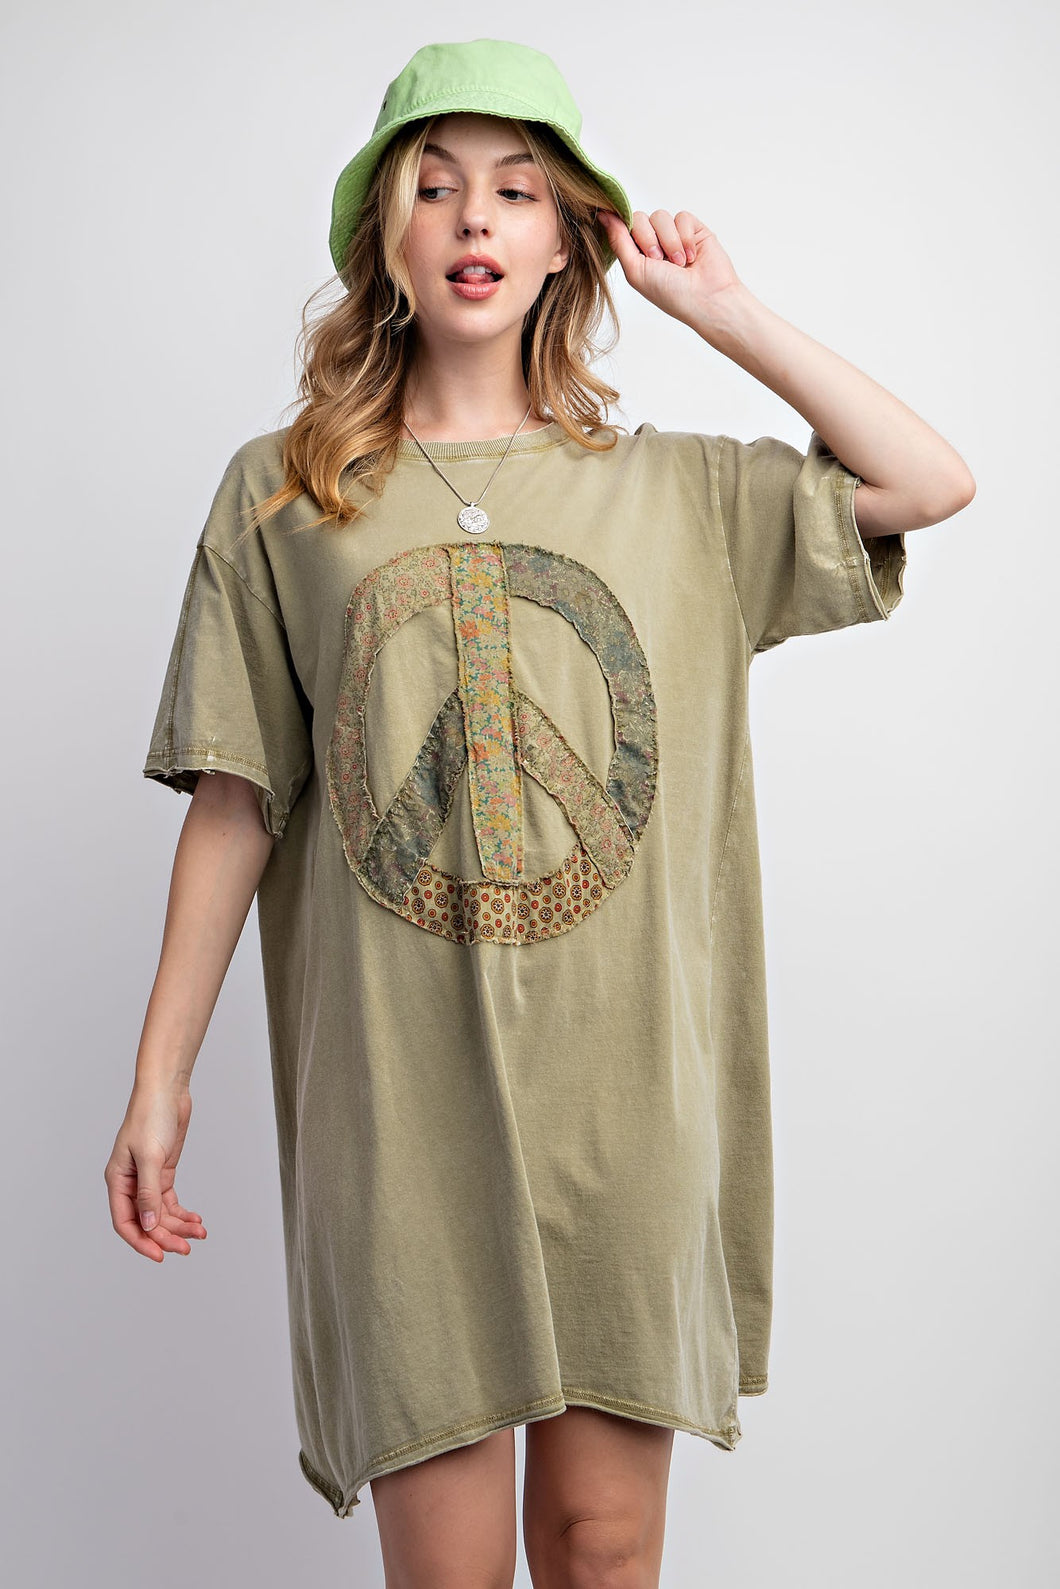 Easel Peace Patched Cotton Jersey Tunic Top in Faded Olive Dress Easel   